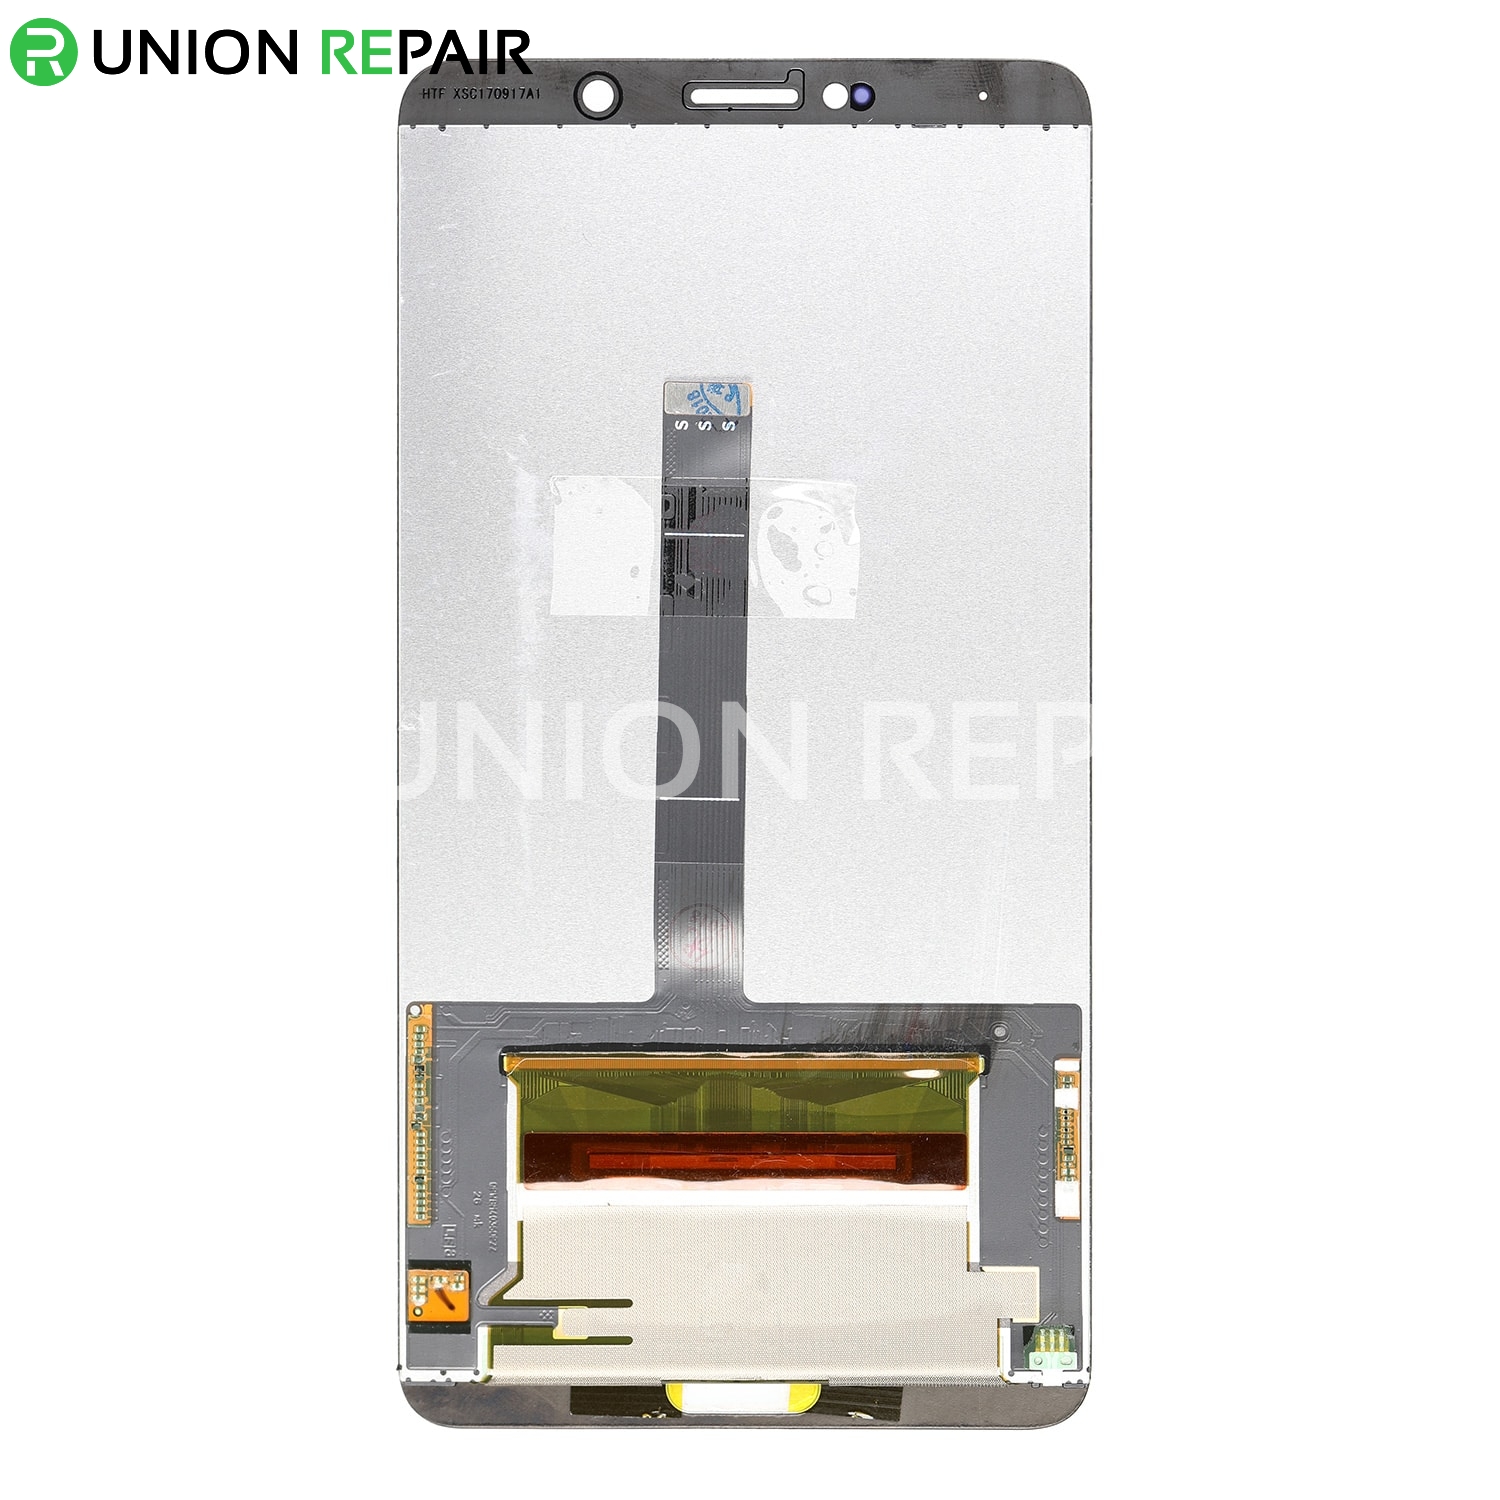 Replacement for Huawei Mate 10 LCD with Digitizer Assembly - Mocha Brown